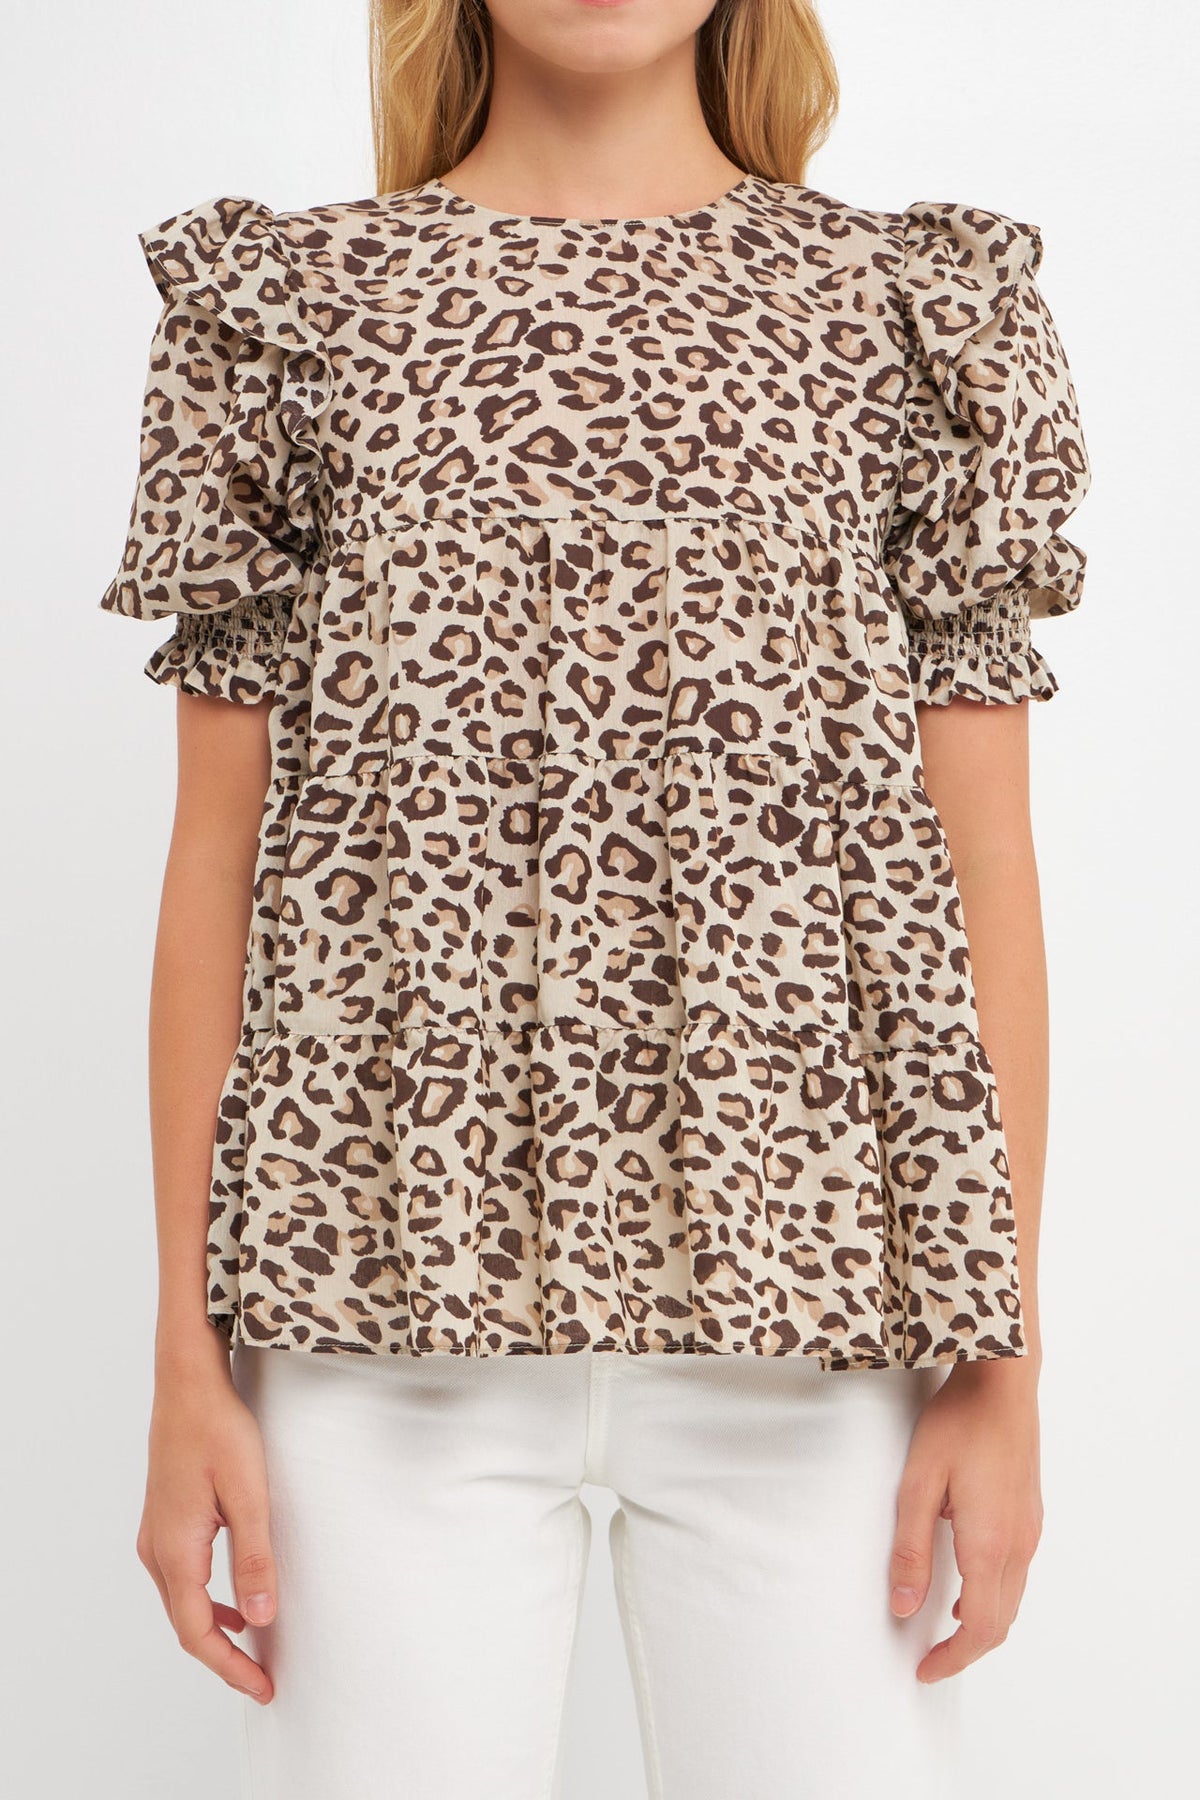 FREE THE ROSES - Animal Print Tiered Blouse - SHIRTS & BLOUSES available at Objectrare